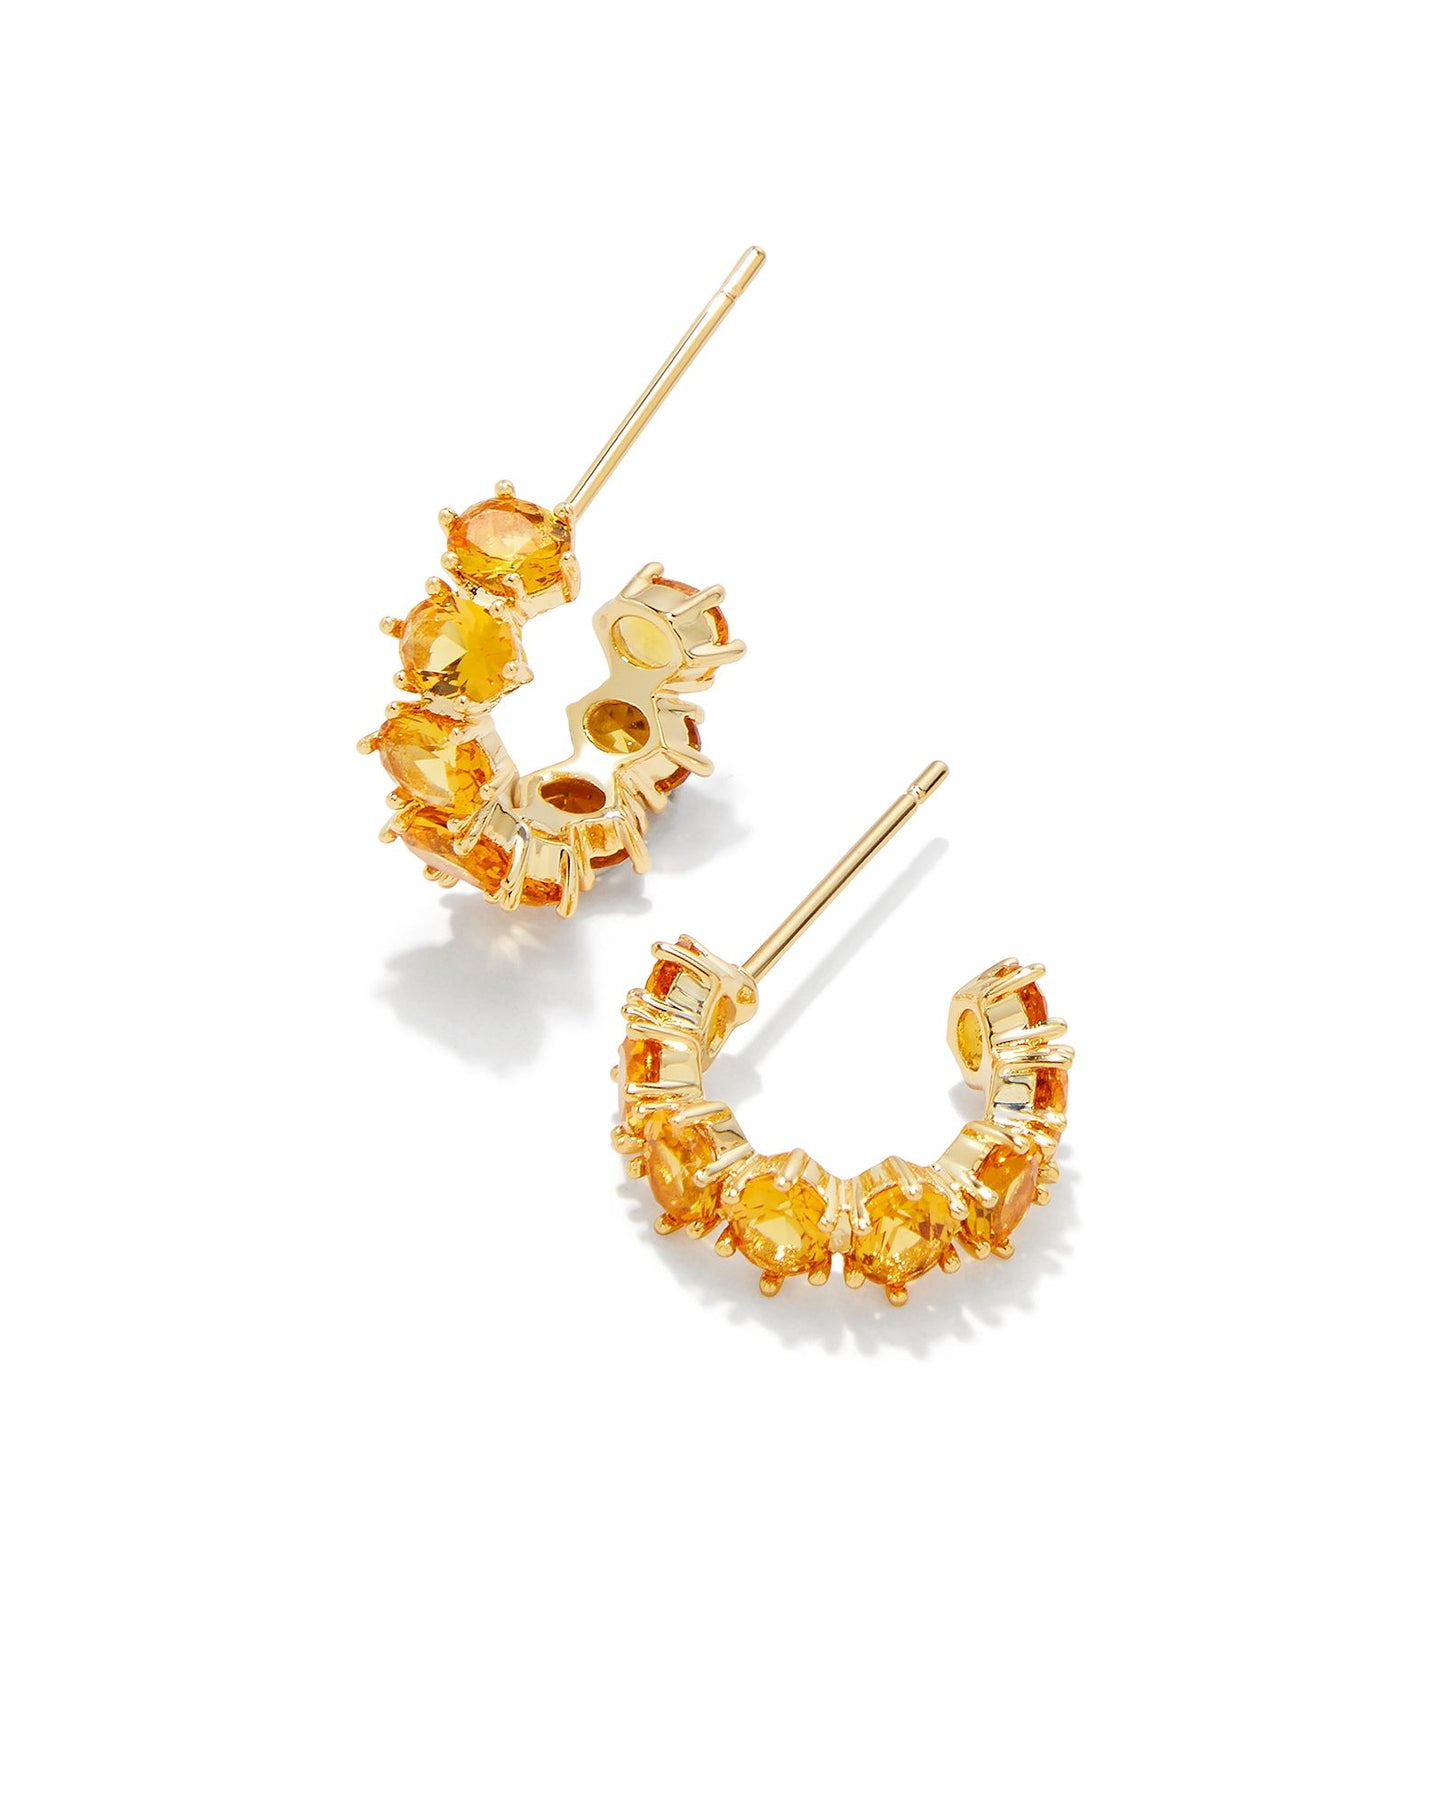 Cailin Crystal Huggie Earrings | Gold & Golden Yellow Crystal